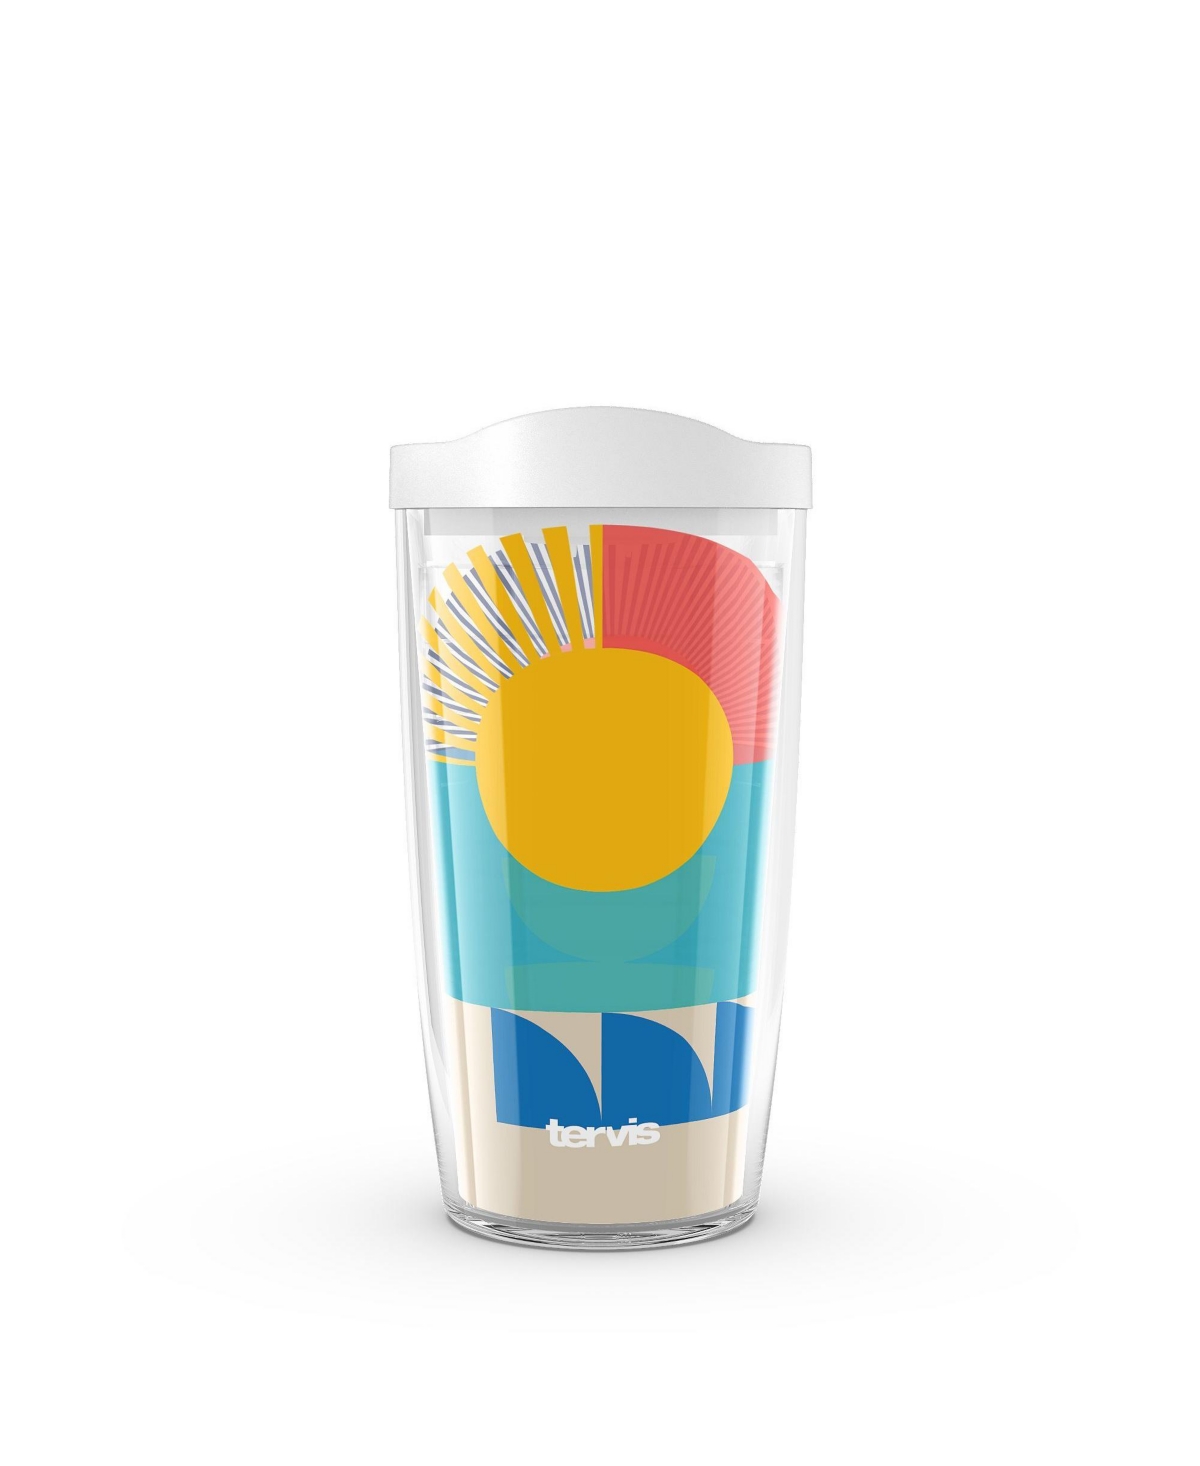 Tervis Tumbler Tervis Beach Bright Made In Usa Double Walled Insulated Tumbler Travel Cup Keeps Drinks Cold & Hot, In Open Miscellaneous